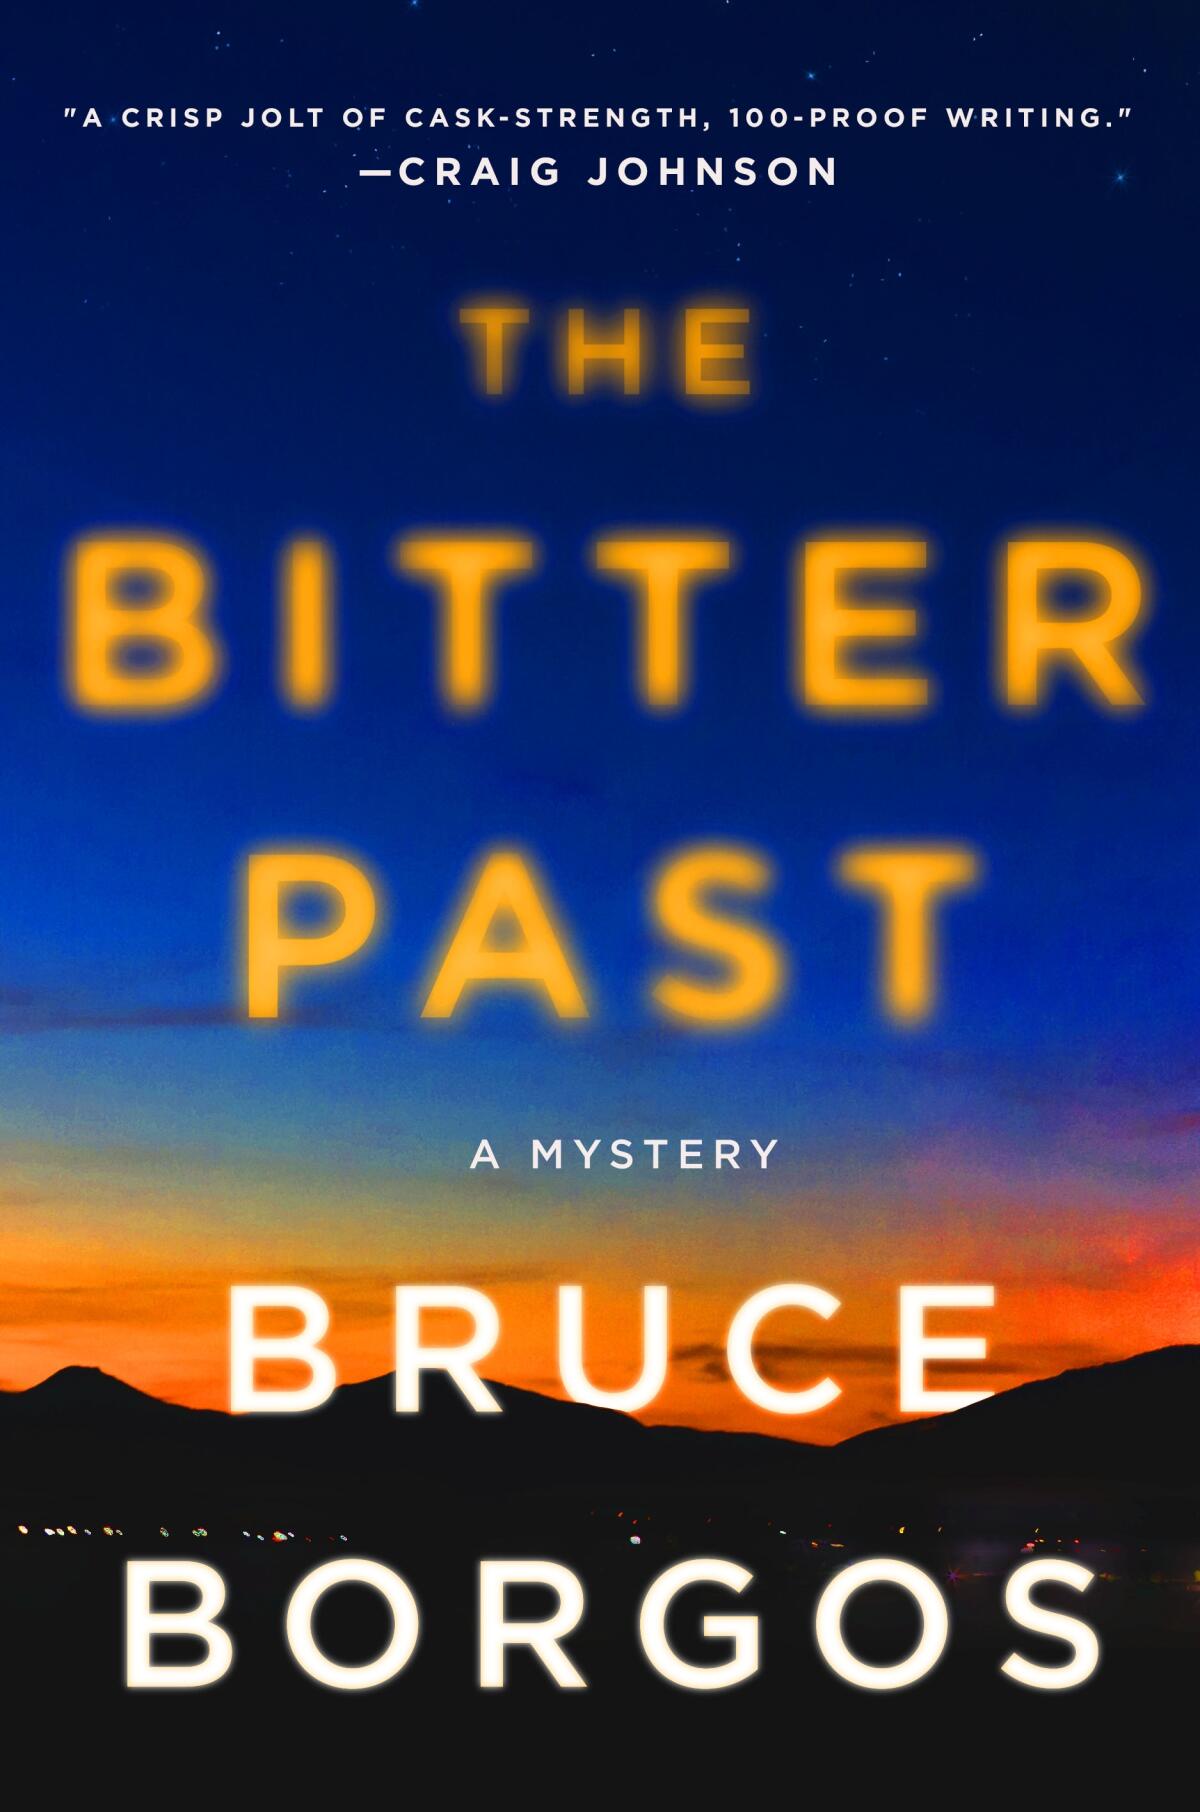 A book cover featuring the silhouette of hills against an orange and blue sky, reading "THE BITTER PAST."